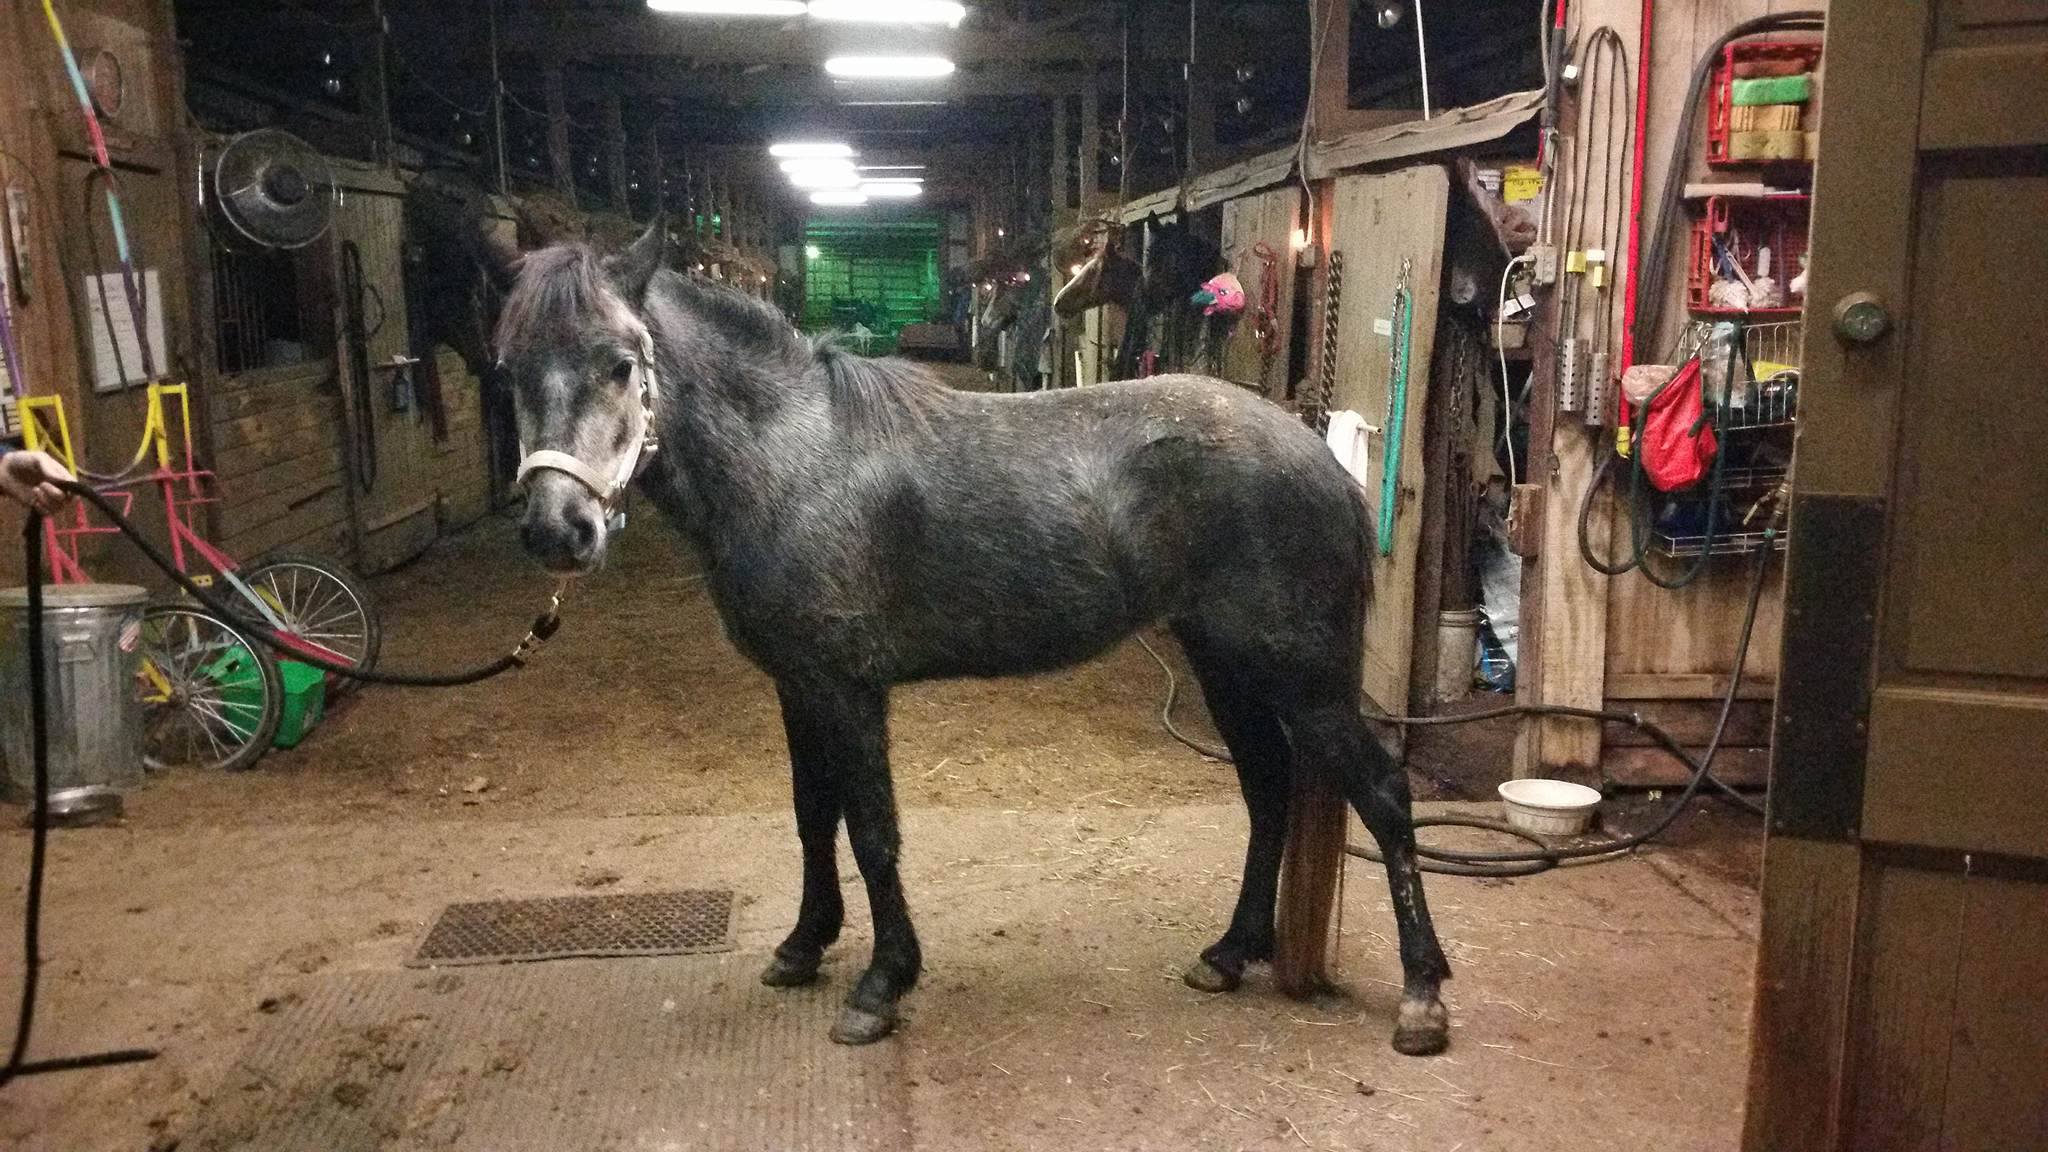 Dori is a very nicely put together, adoptable pony in WV